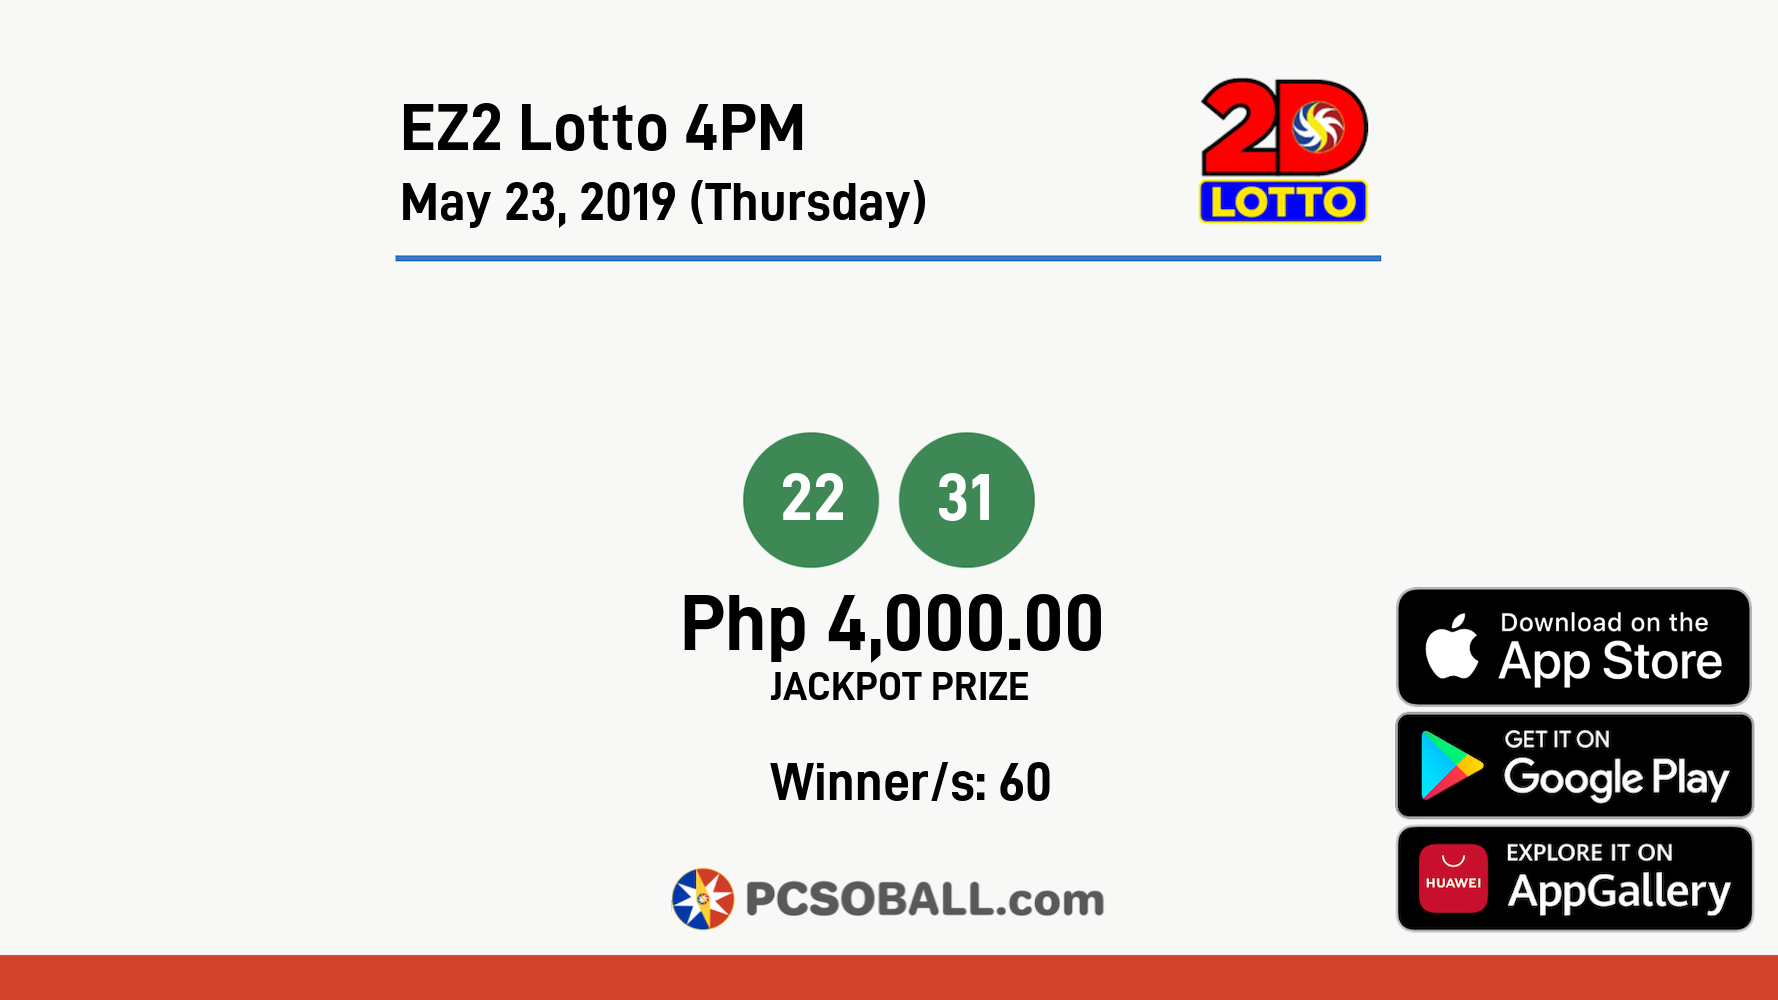 EZ2 Lotto 4PM May 23, 2019 (Thursday) Result